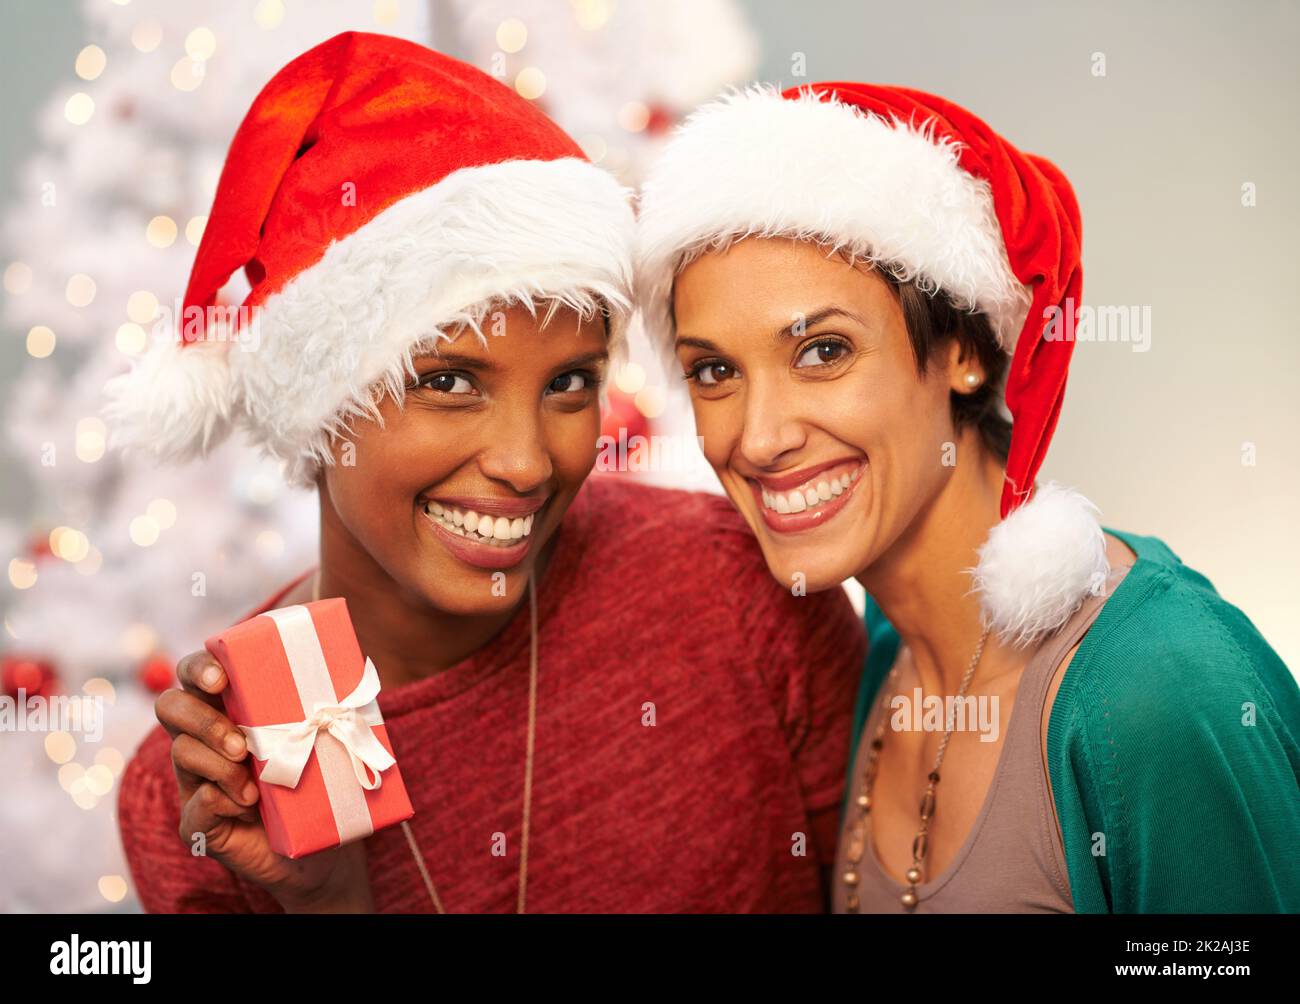 We love the festive season. A portrait of two happy bet friends at Christmas time. Stock Photo